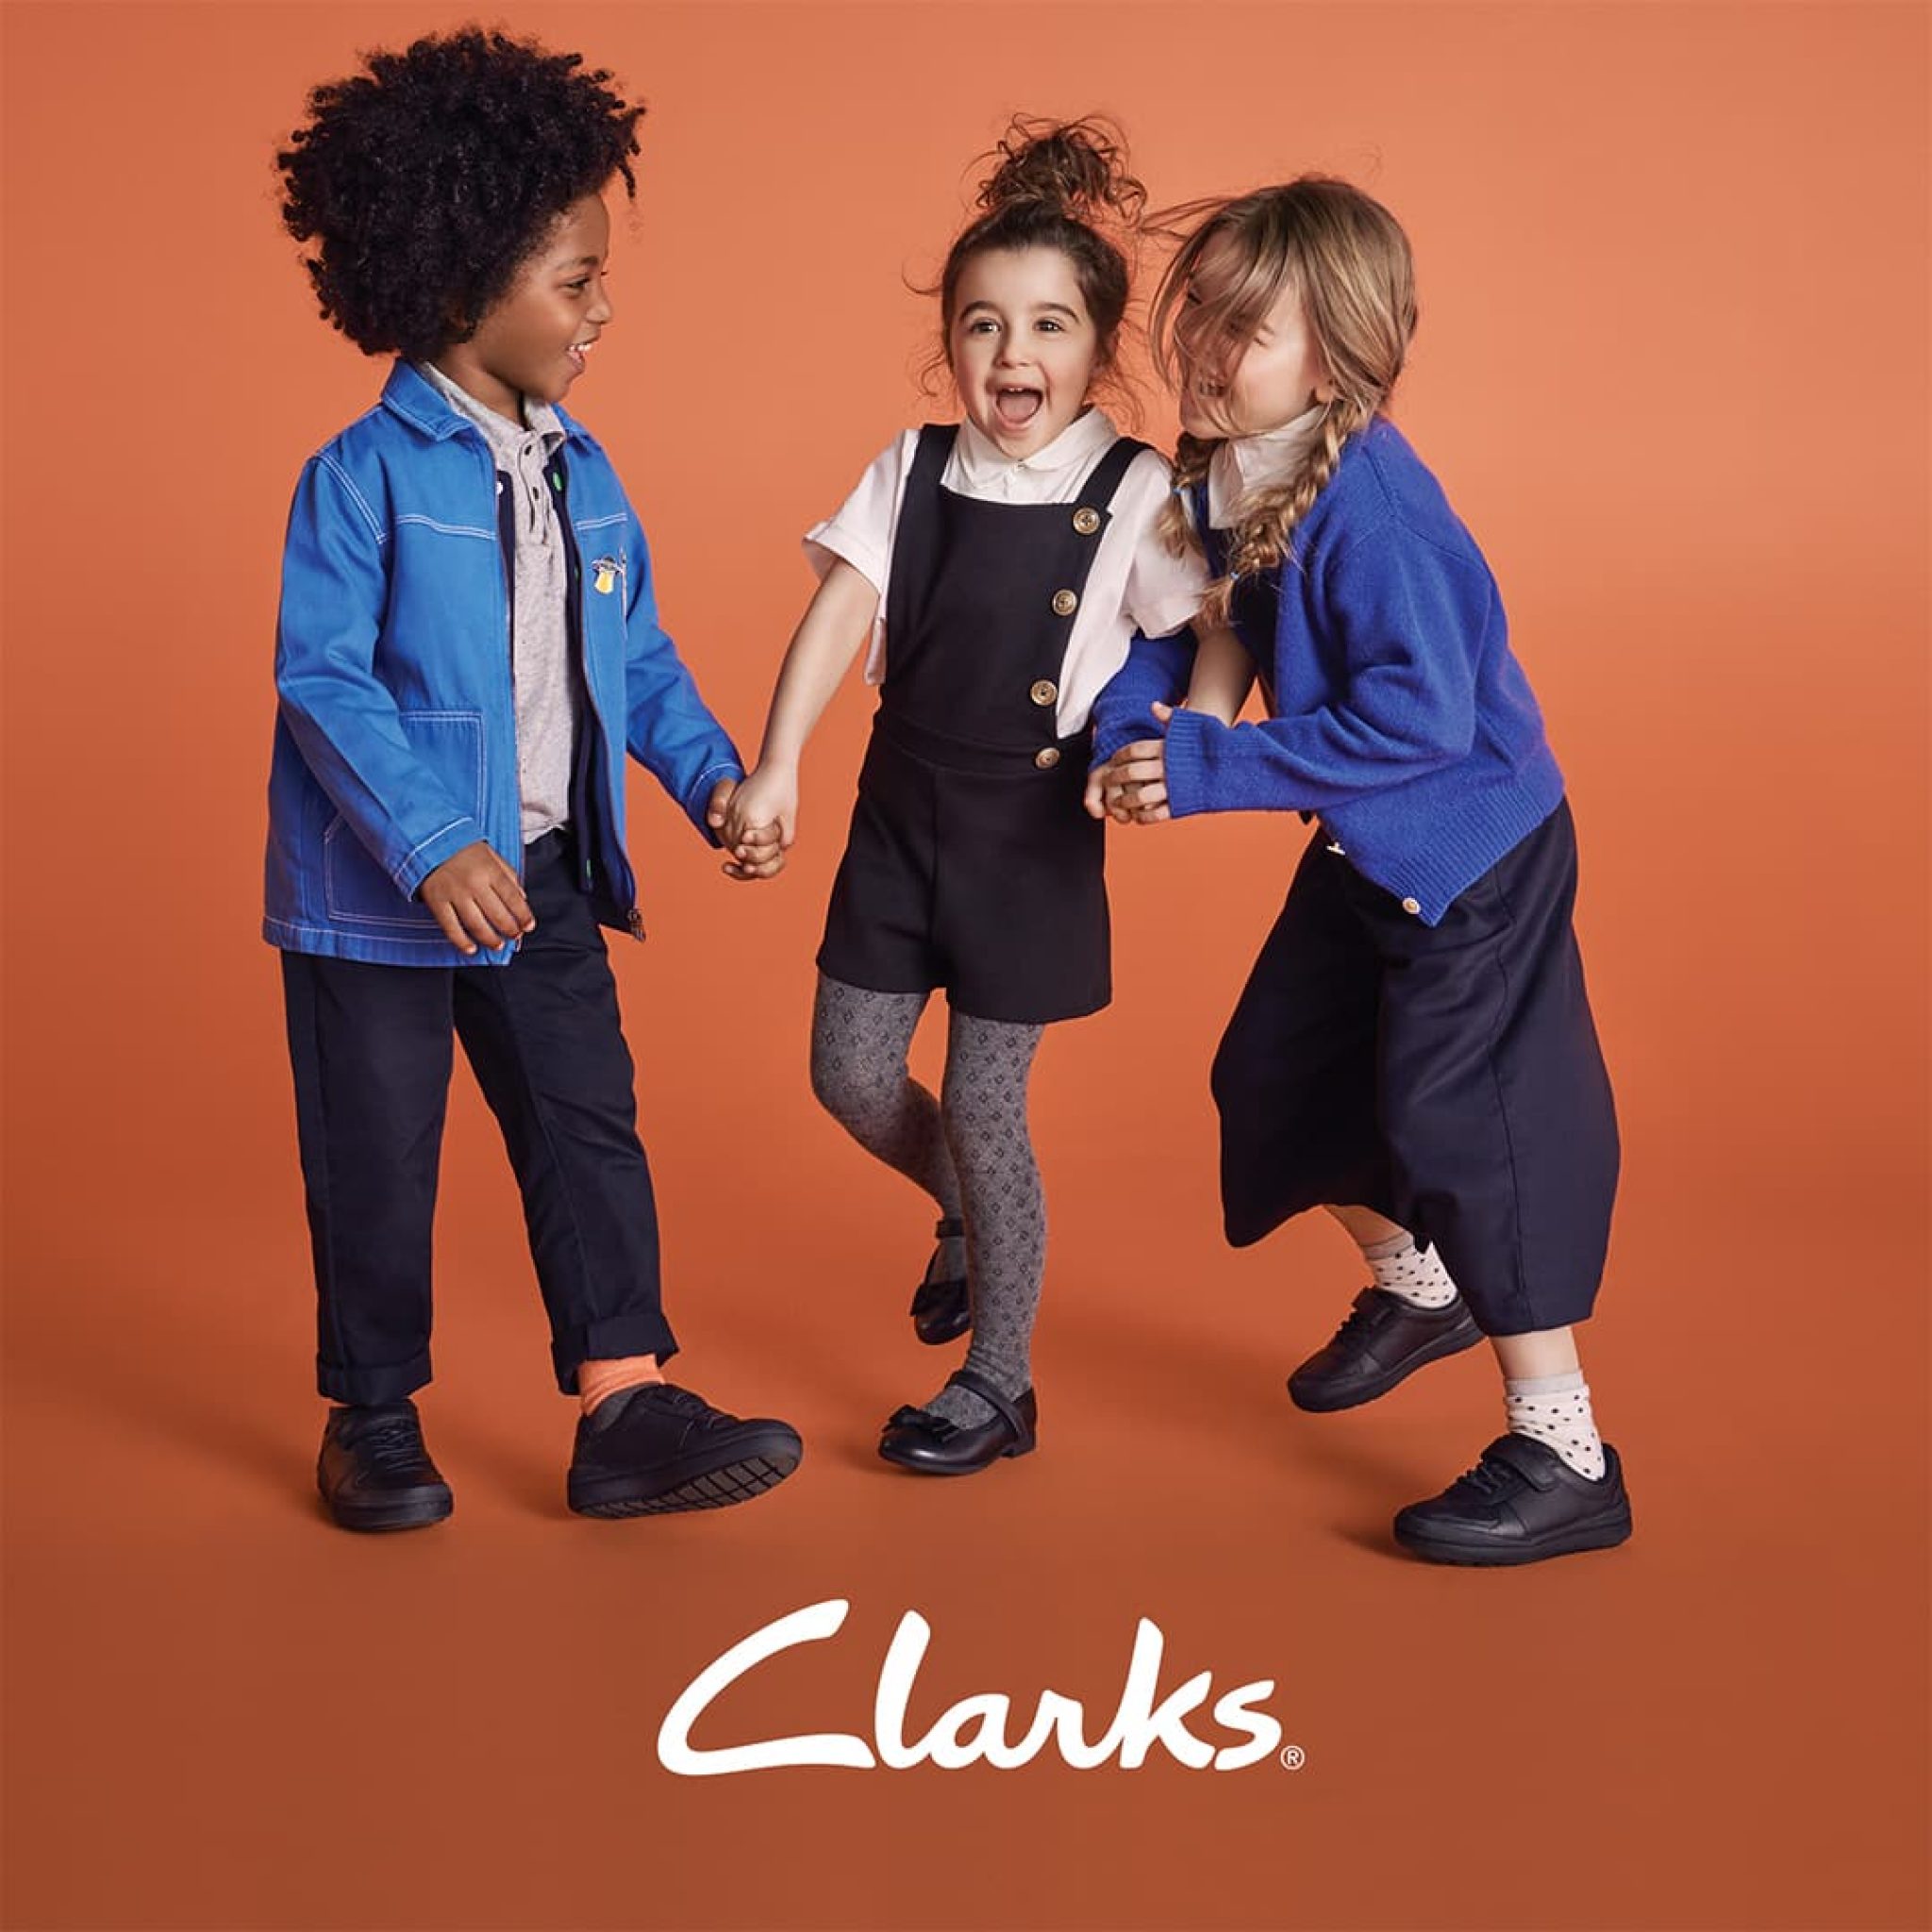 Back to School with Clarks at Newsquare Shopping Centre West Bromwich